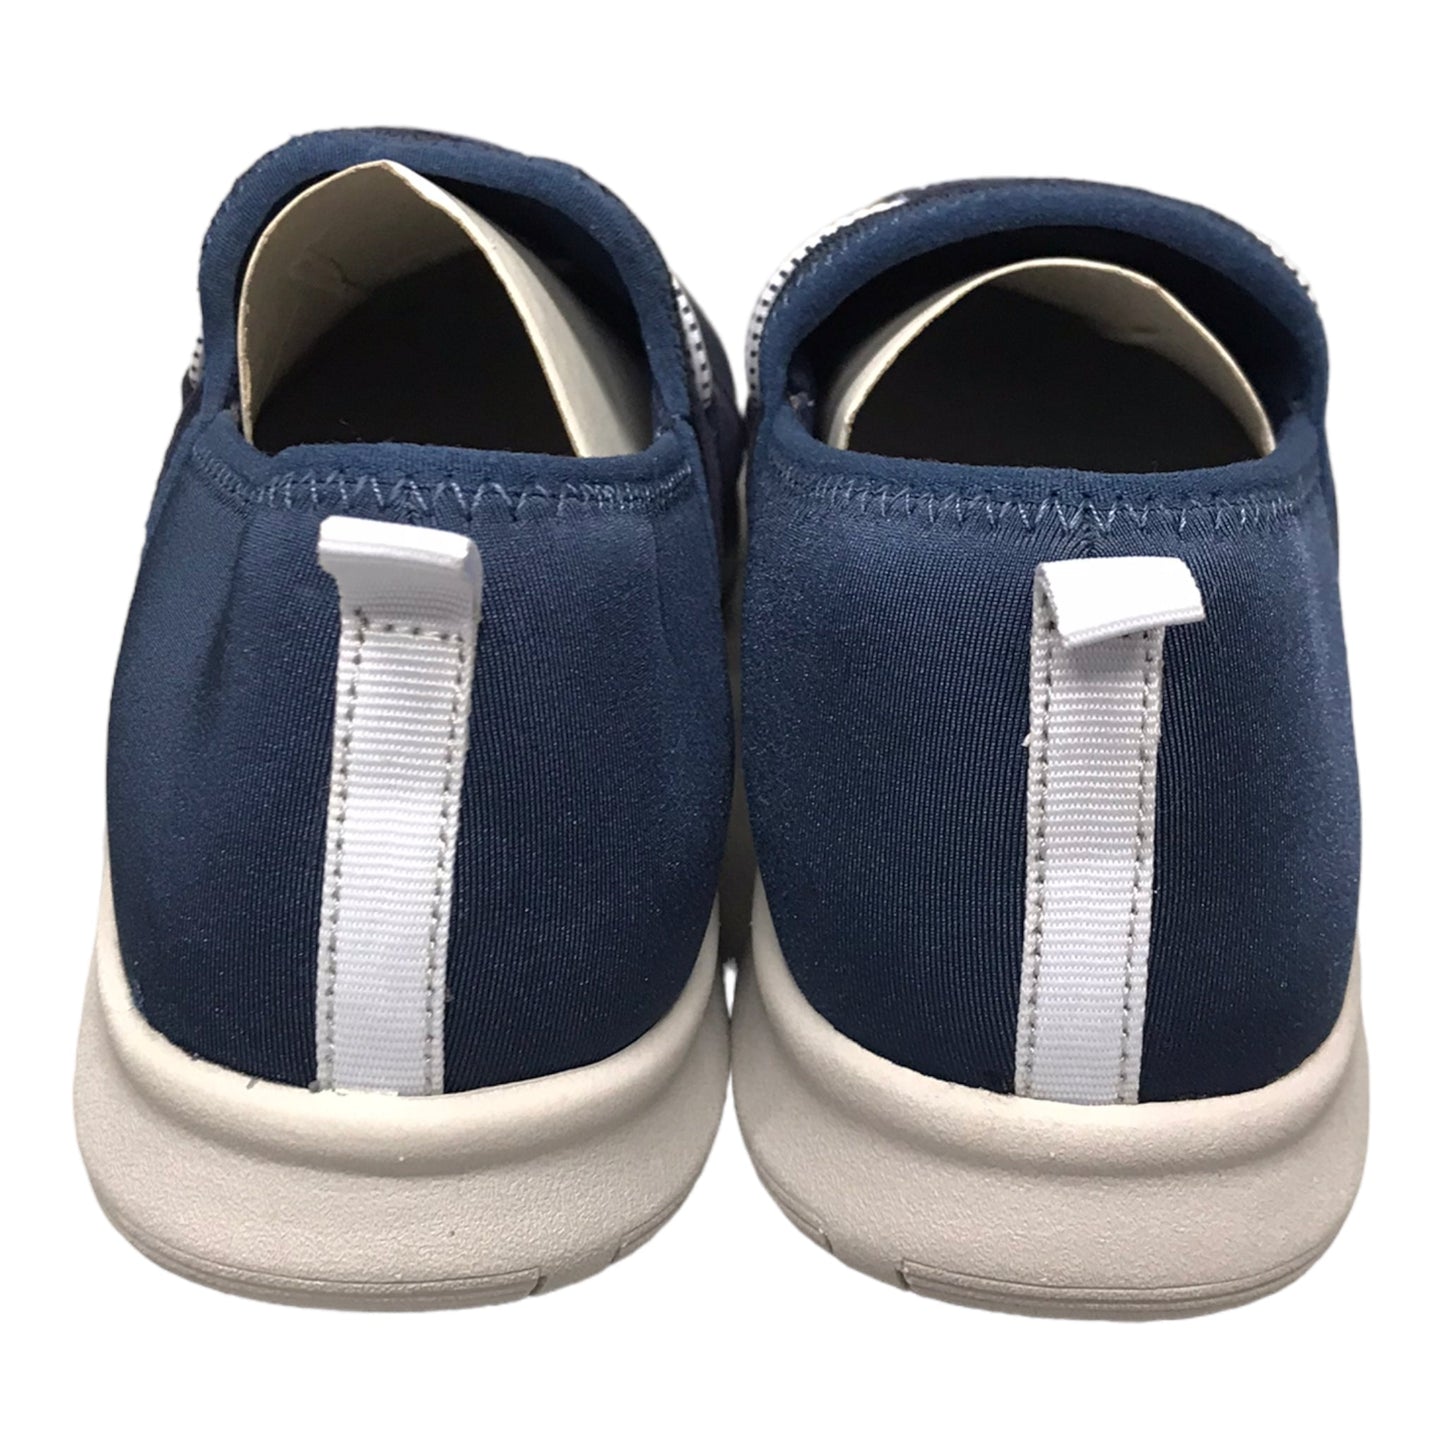 Shoes Sneakers By Easy Spirit  Size: 6.5